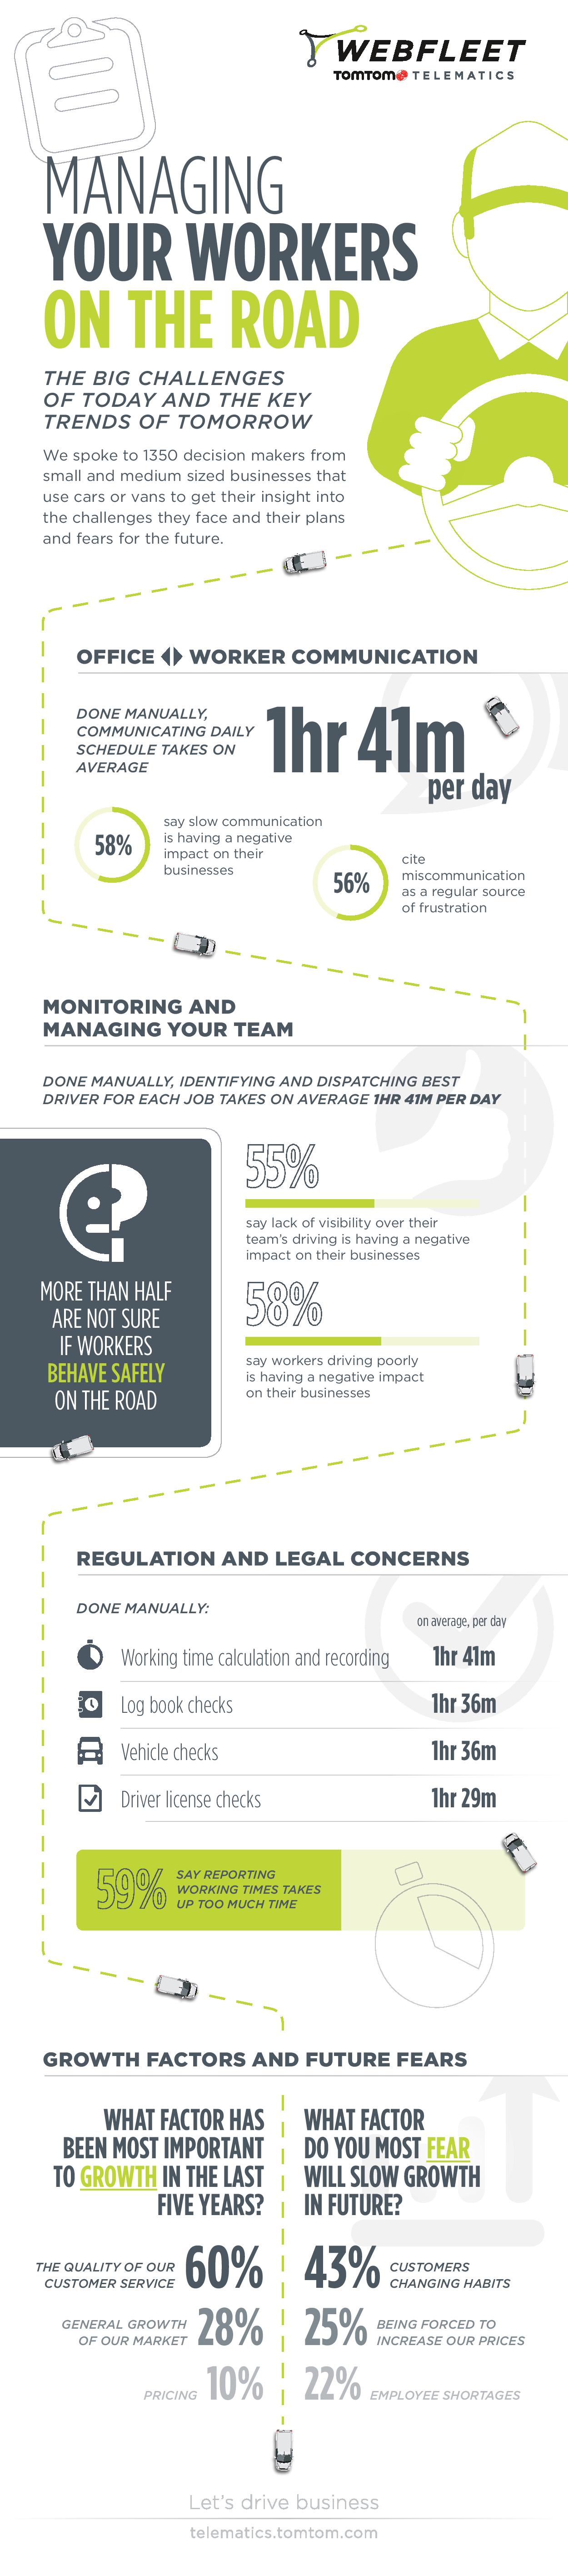 Infographic on vehicle management challenges for SMEs